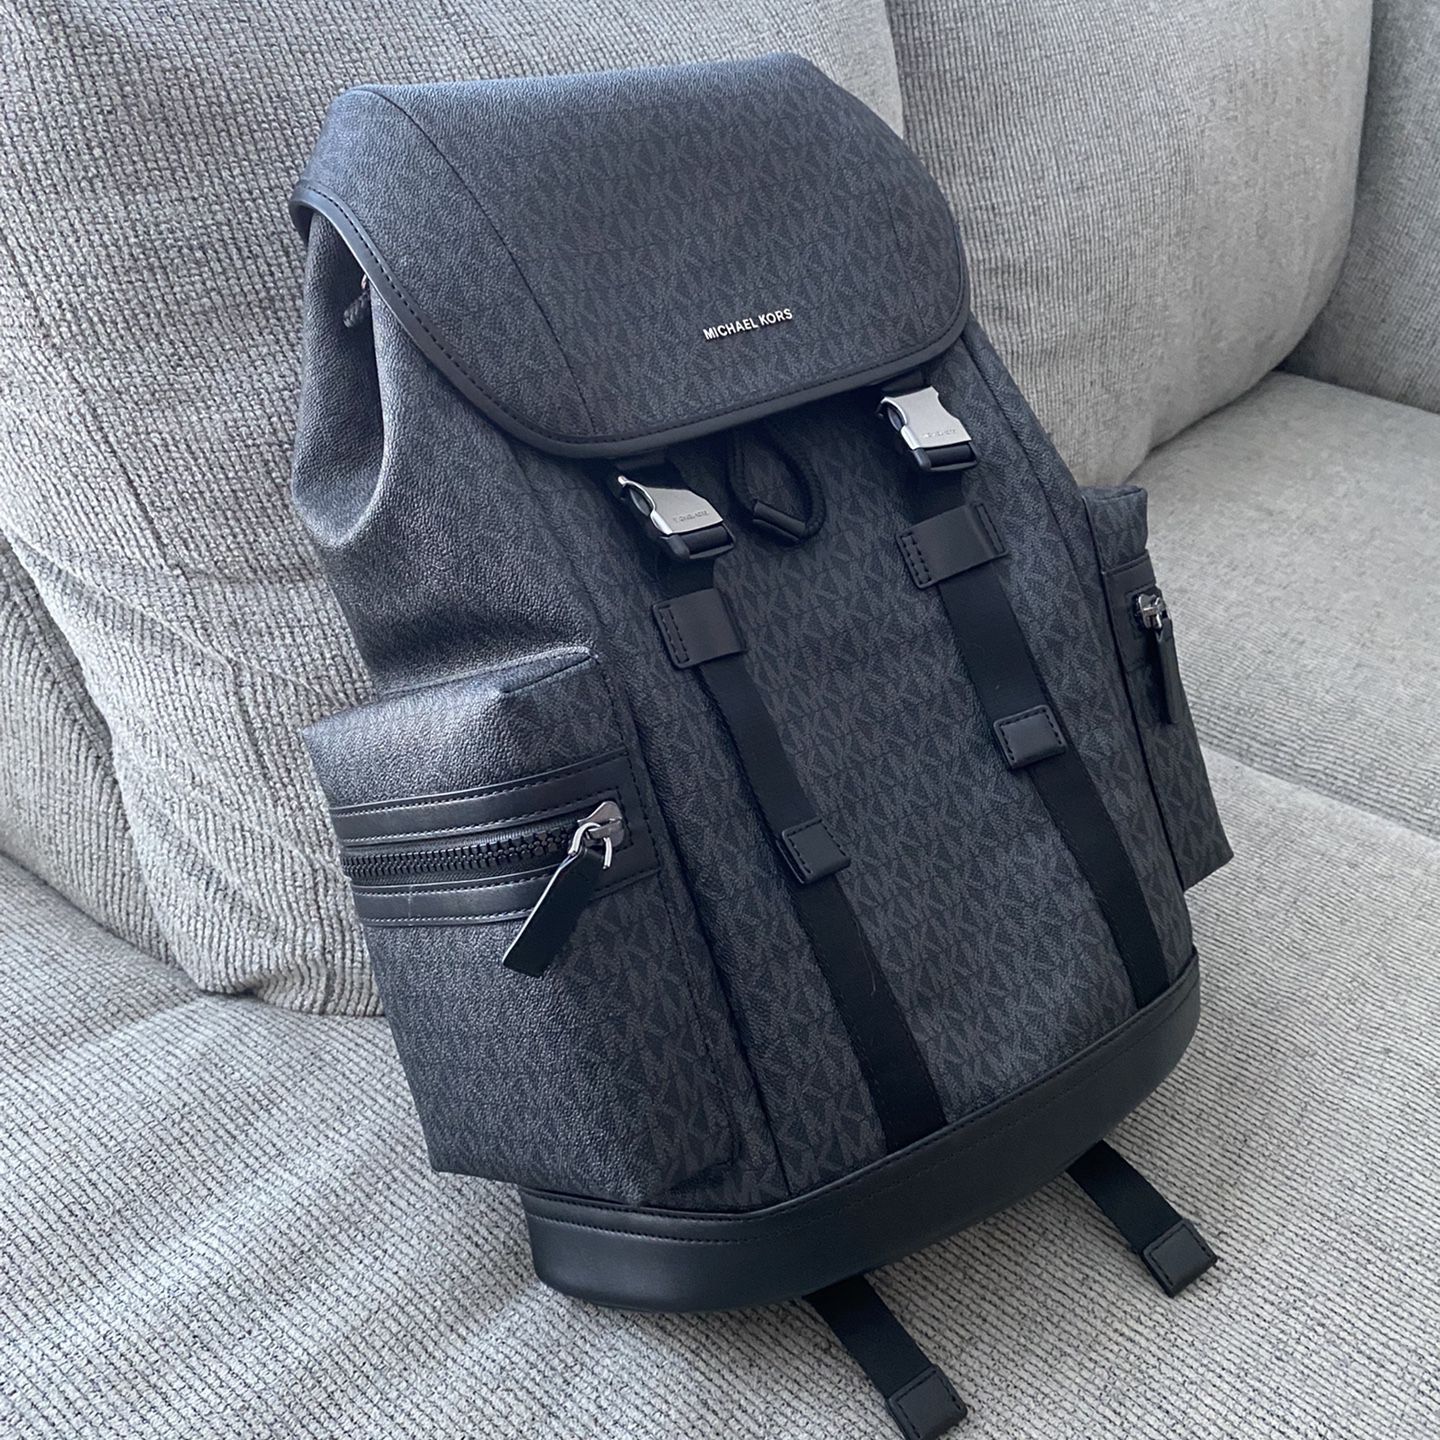 Michael Kors Backpack for Sale in Grove City, OH - OfferUp